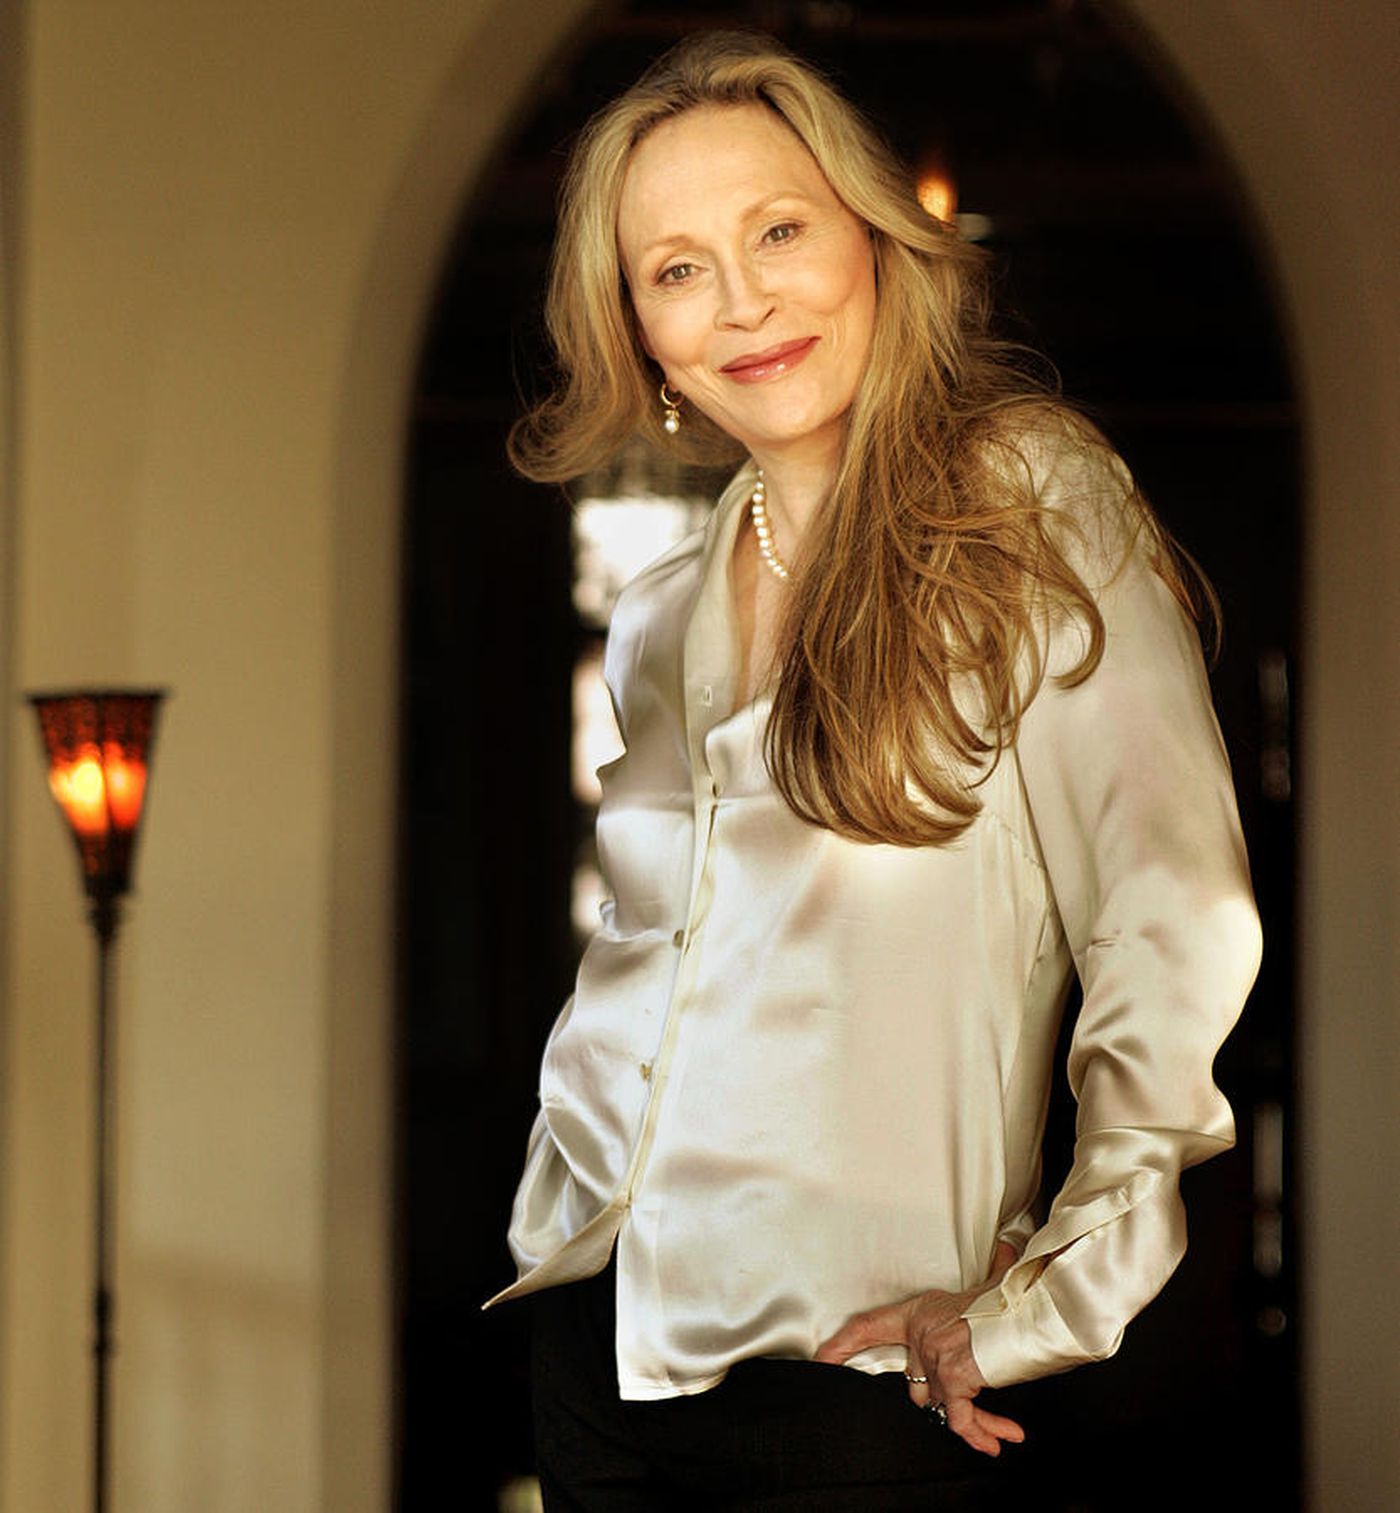 A Star Is Born: Faye Dunaway turns 77 today